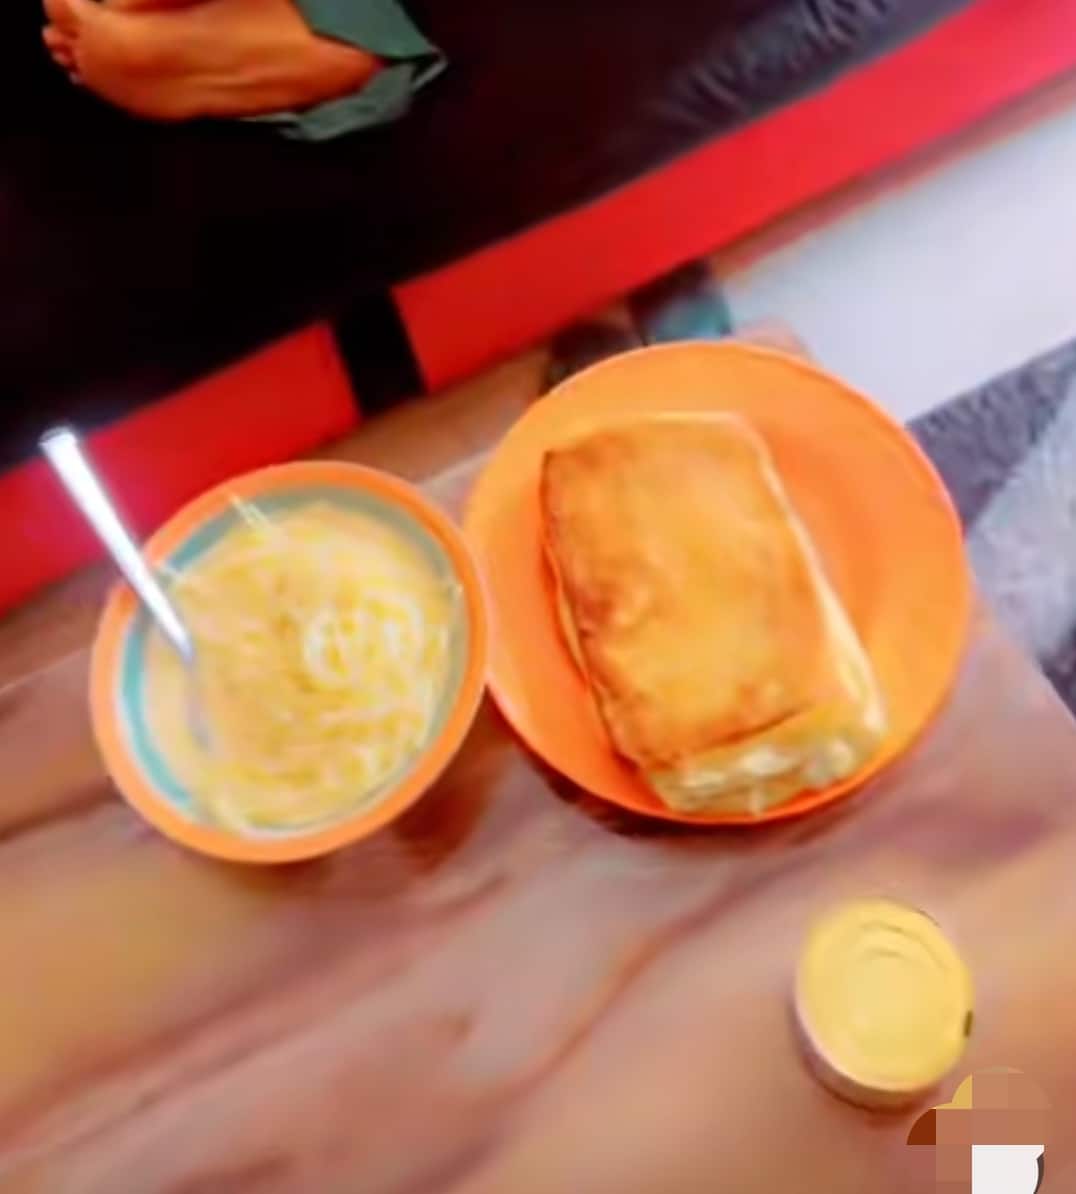 "Sacrifice for the gods" - Nigerian man shocked as his Ghanaian girlfriend adds raw eggs and milk to Indomie